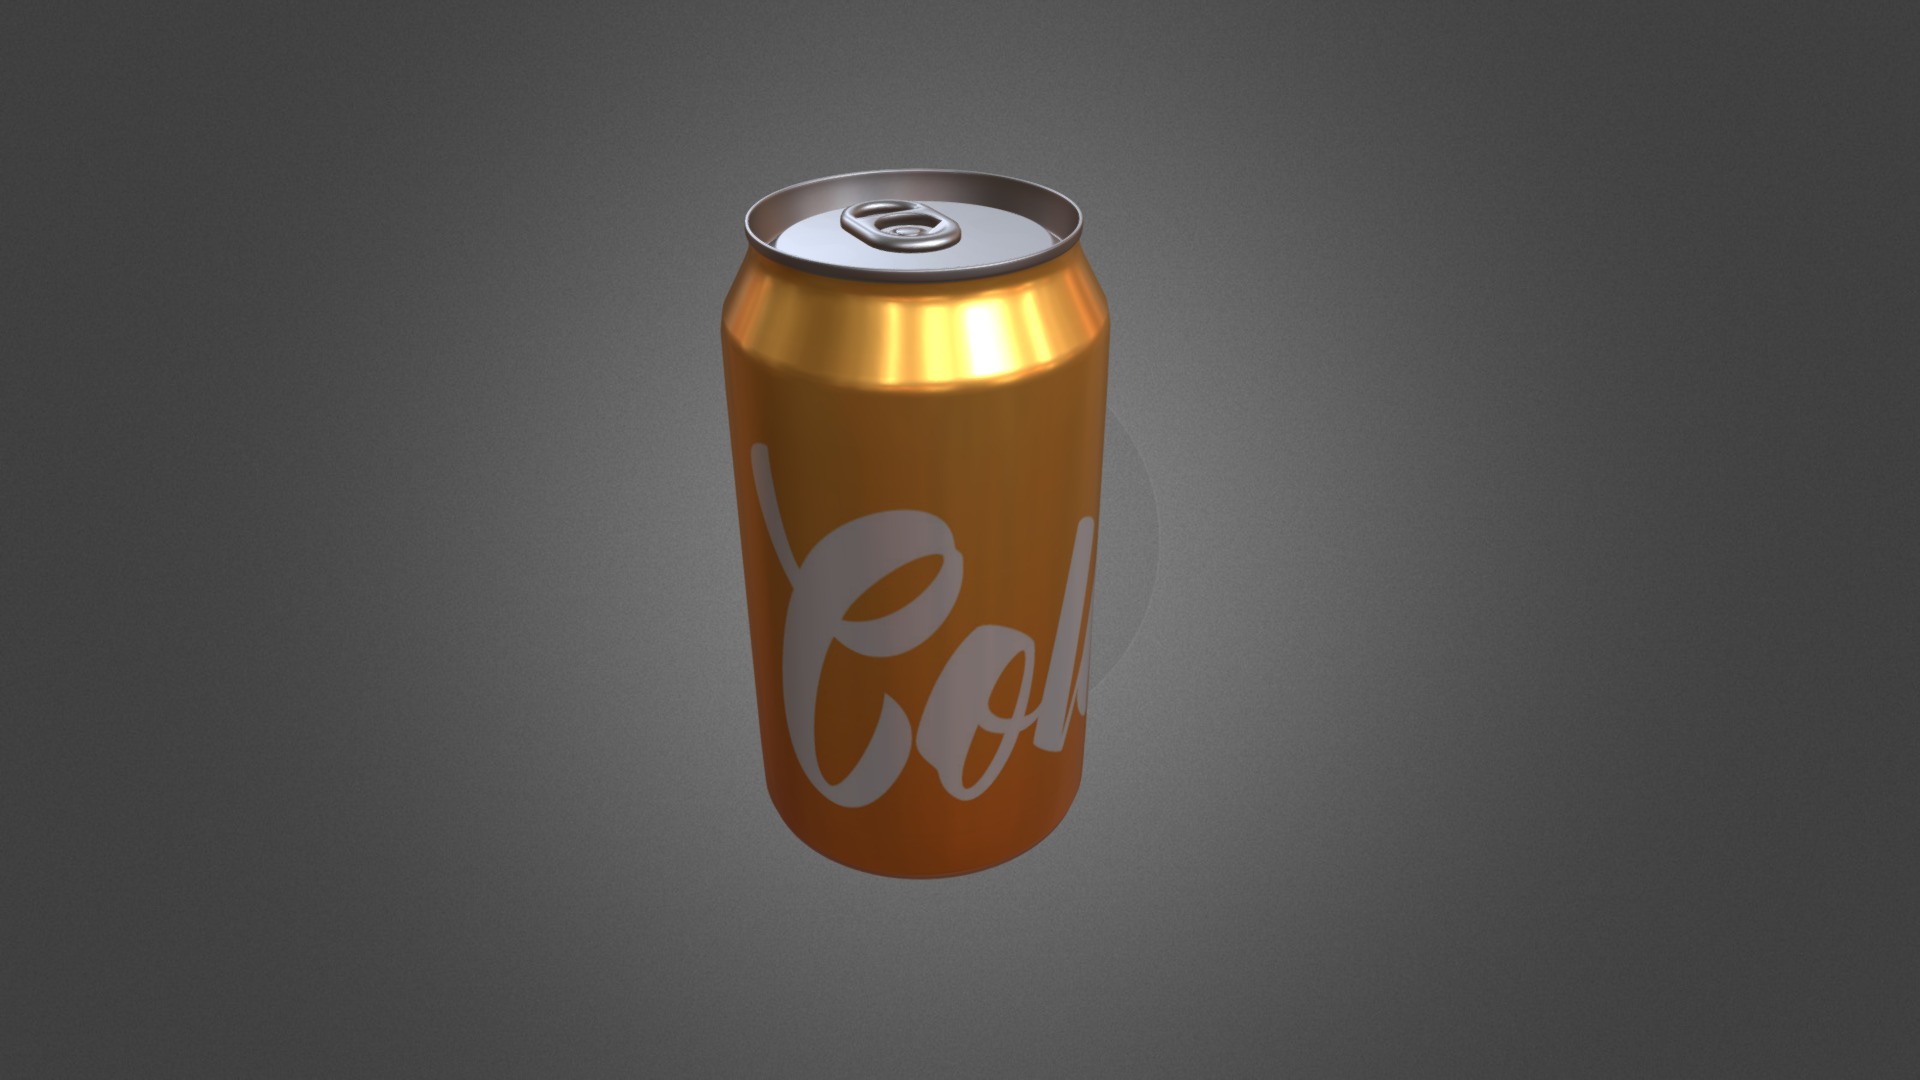 3D model Aluminium Soda Can – UV Mapped - This is a 3D model of the Aluminium Soda Can - UV Mapped. The 3D model is about a can with a graphic design on it.